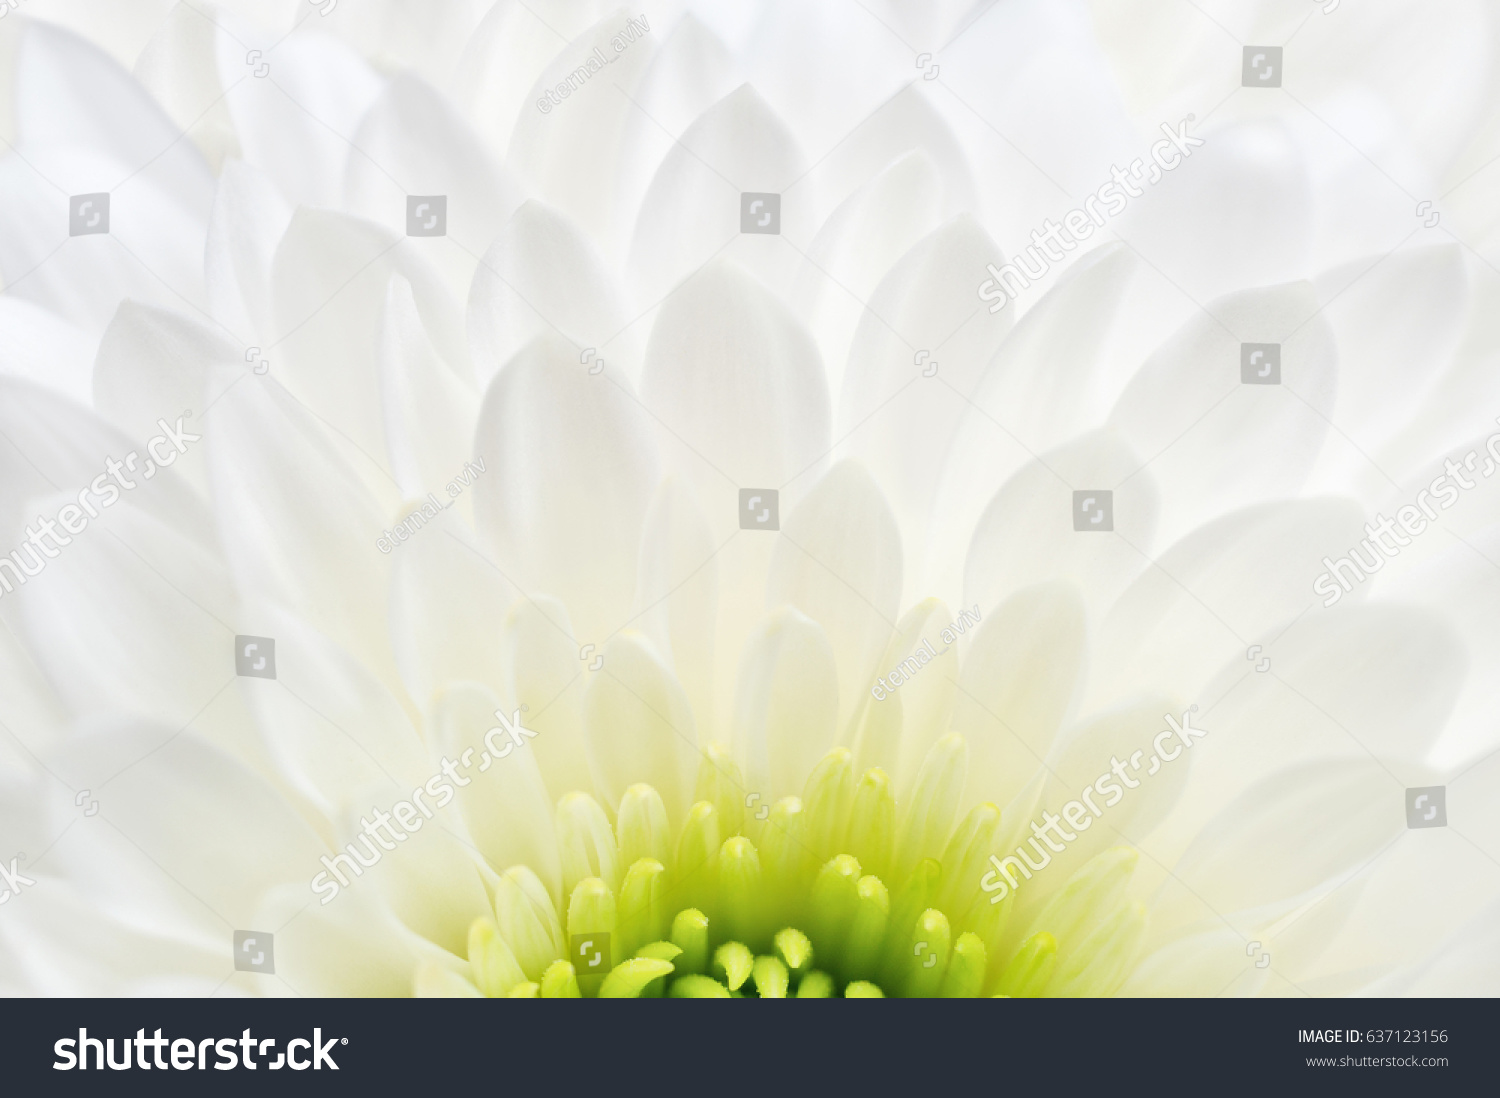 White chrysanthemum close up isolated on white background. Macro image with small depth of field. #637123156